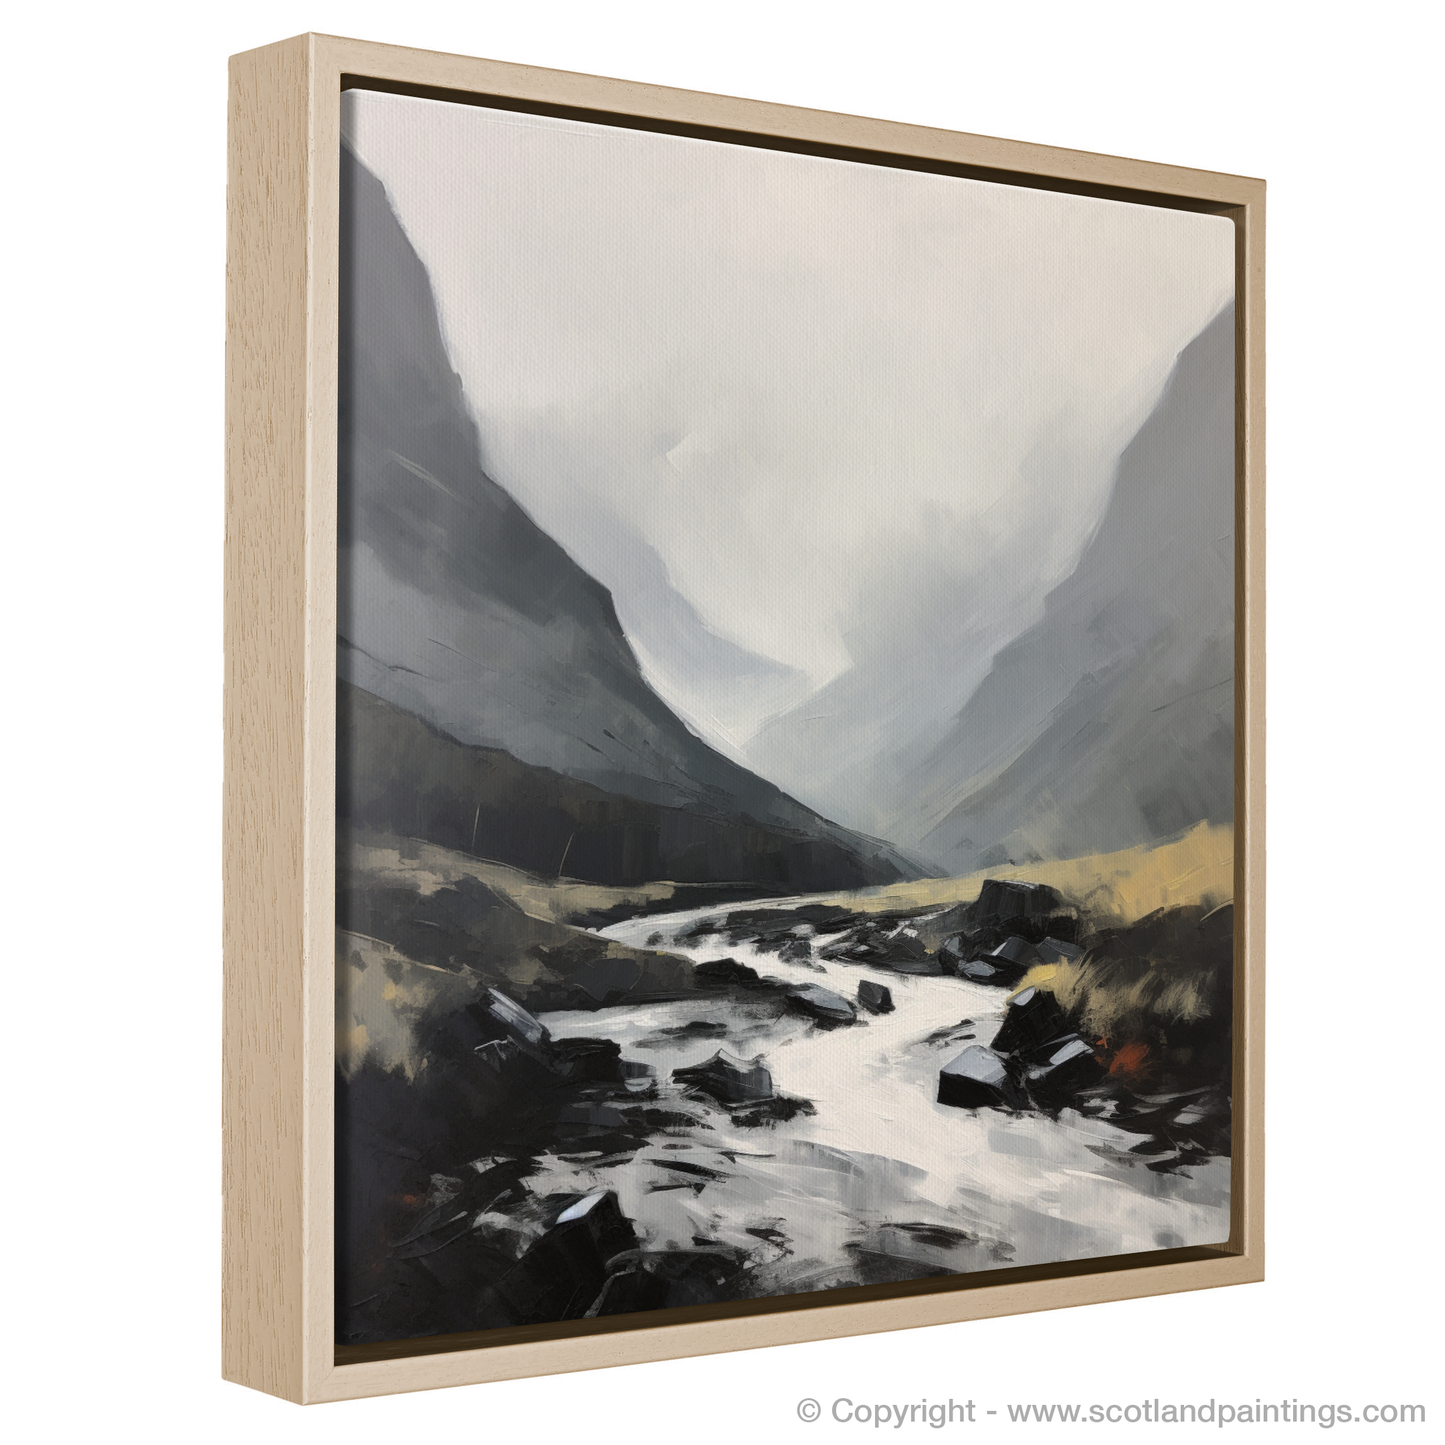 Painting and Art Print of Rolling fog in Glencoe entitled "Mists of Glencoe: An Expressionist Journey".